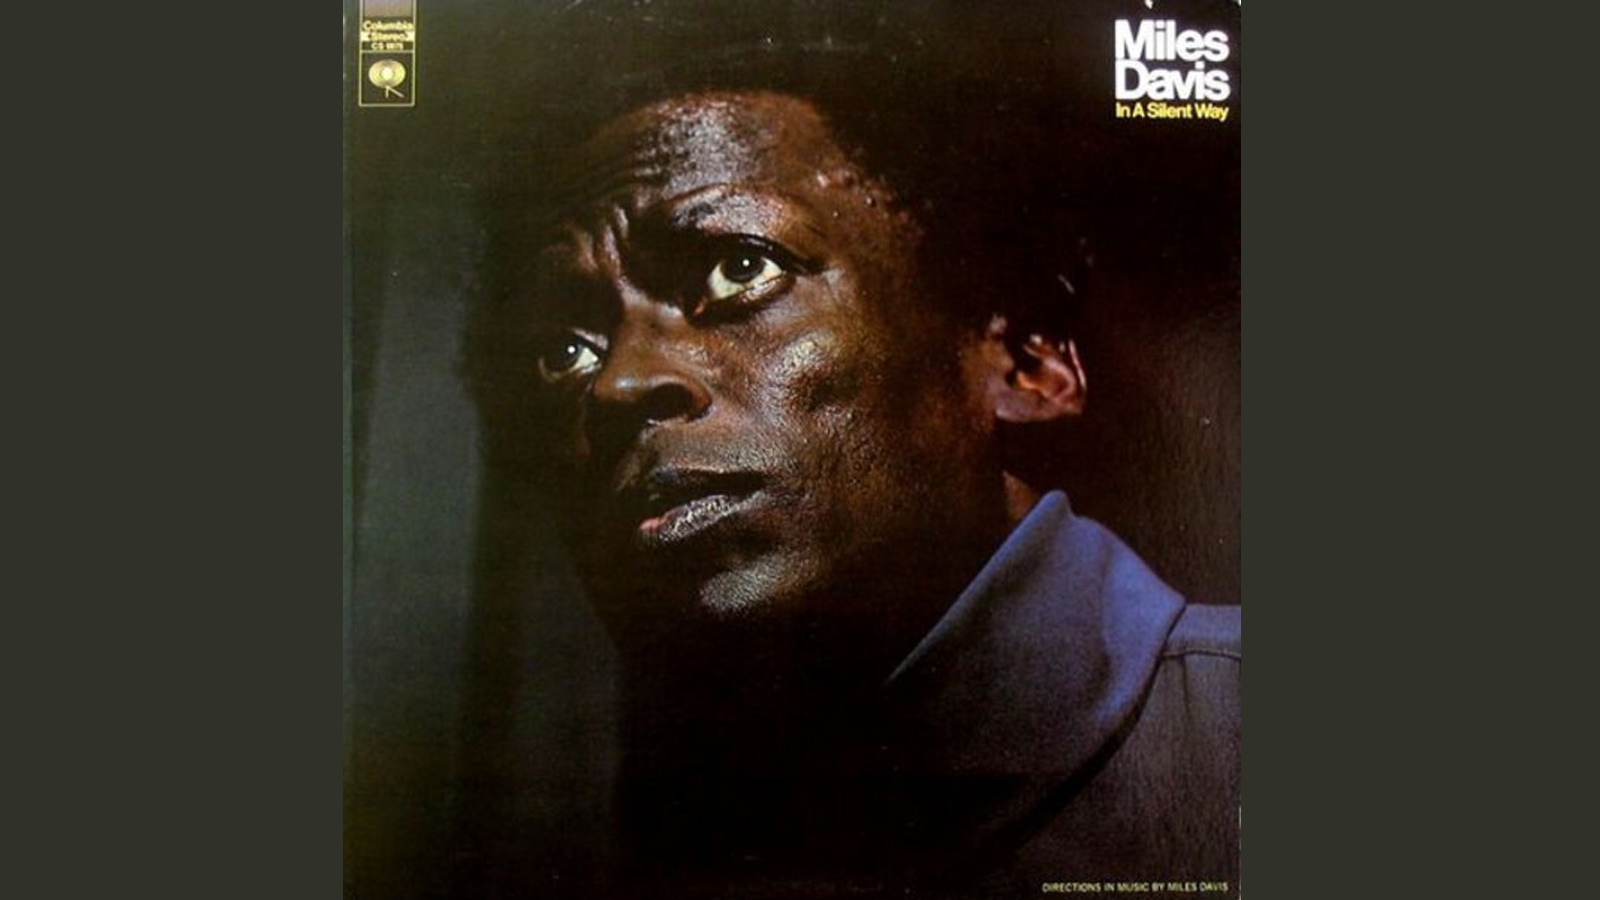 the cover art for miles davis in a silent way